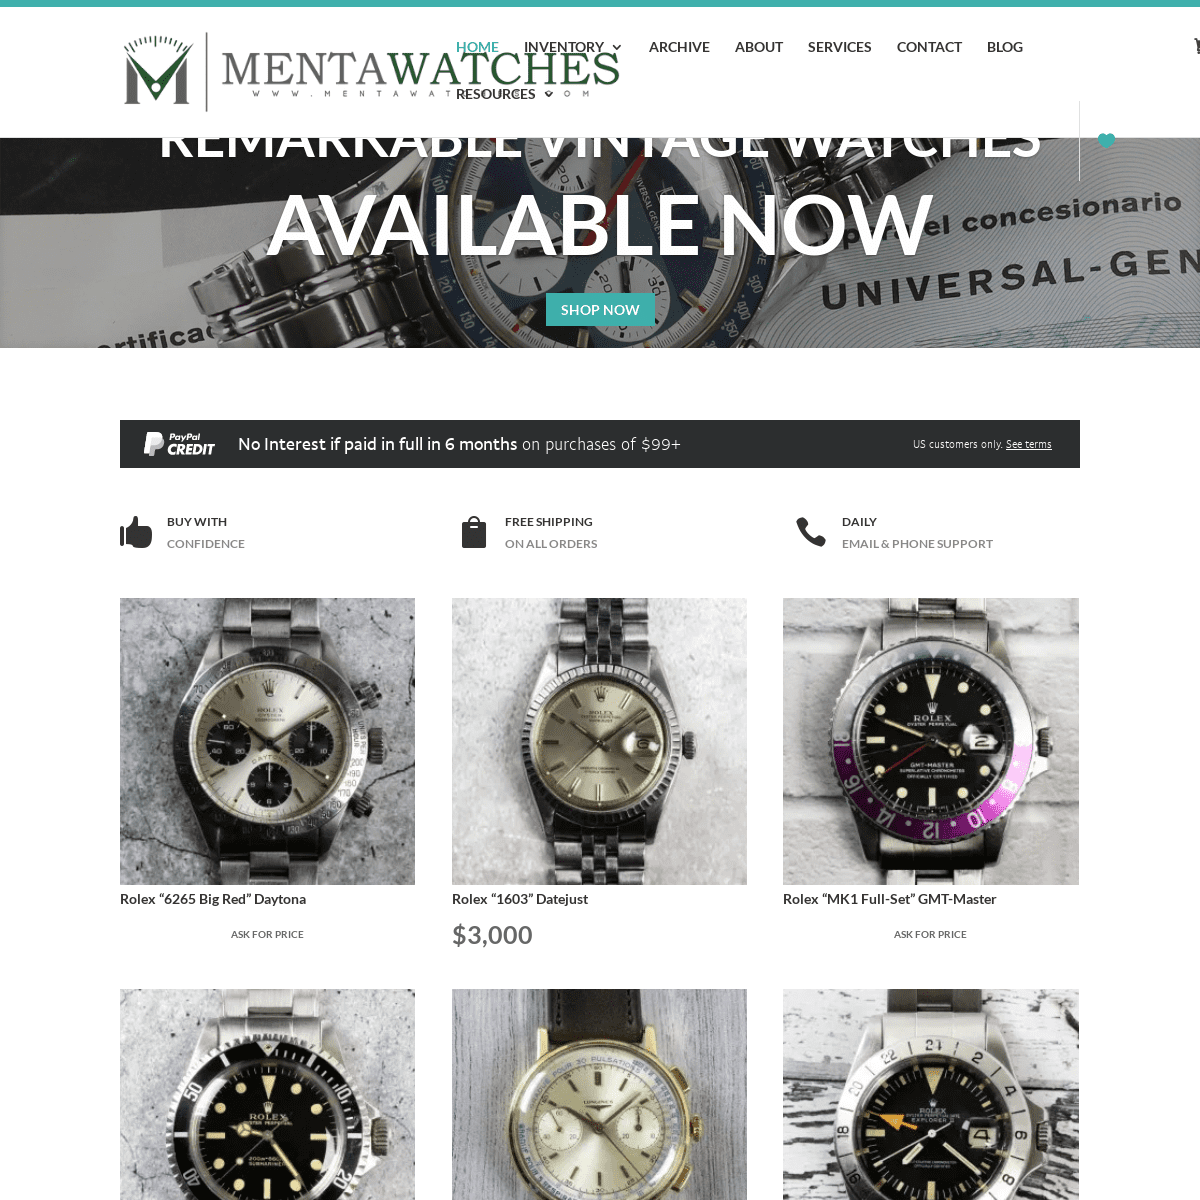 A complete backup of mentawatches.com